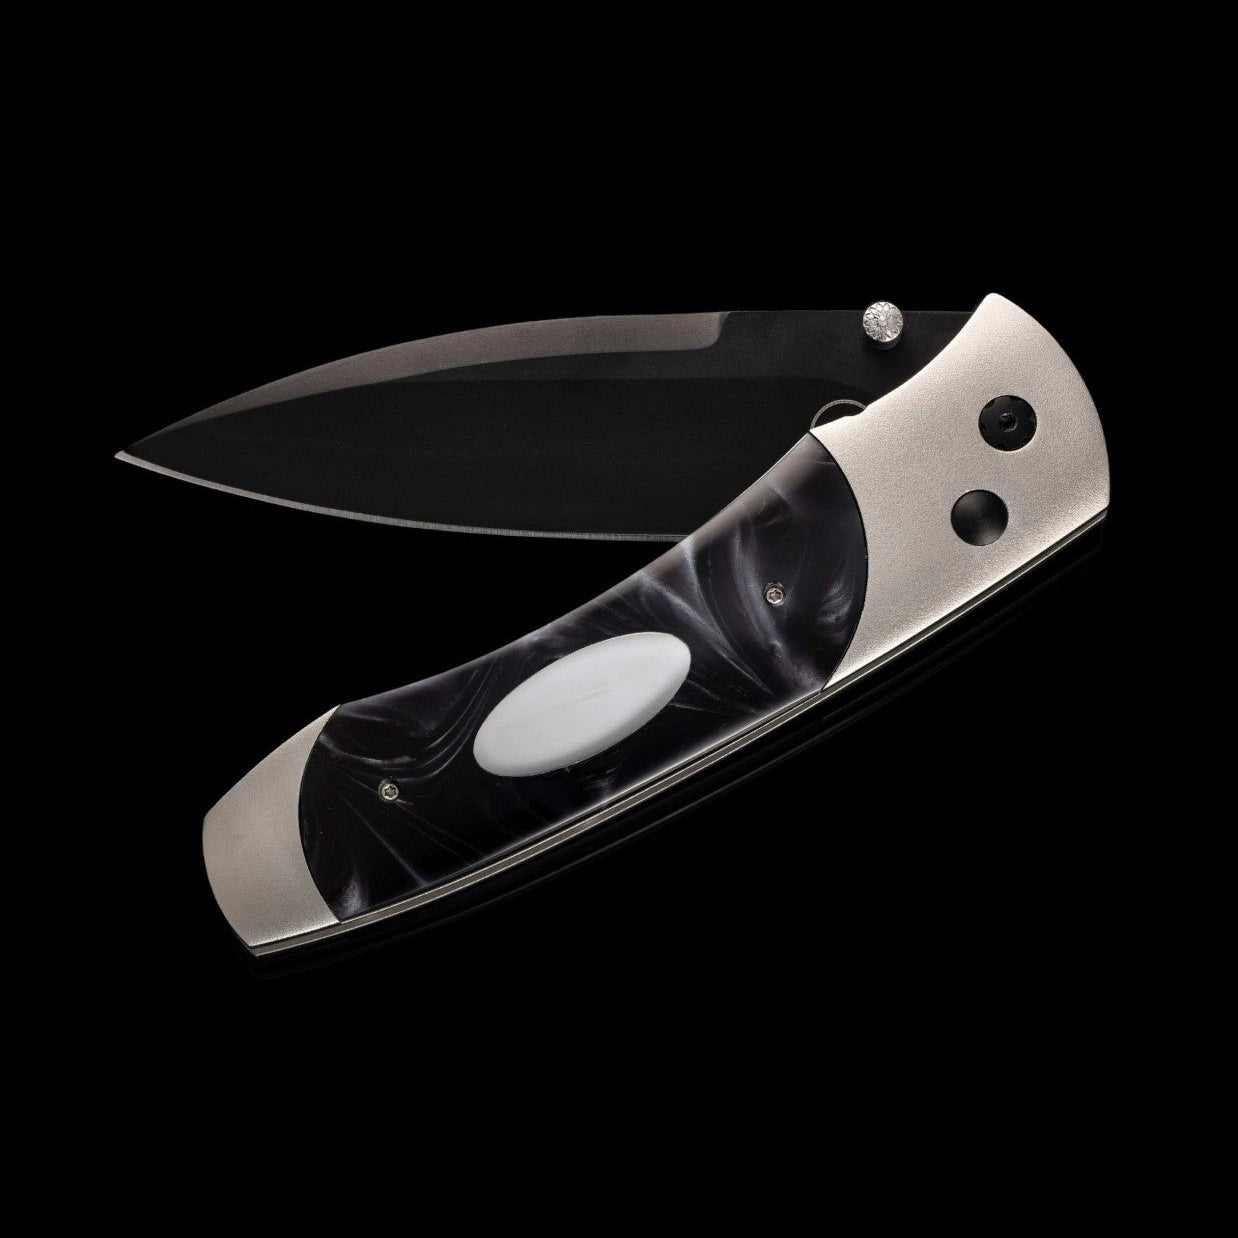 William Henry A300-1B Knife-Knives & Tools-Kevin's Fine Outdoor Gear & Apparel